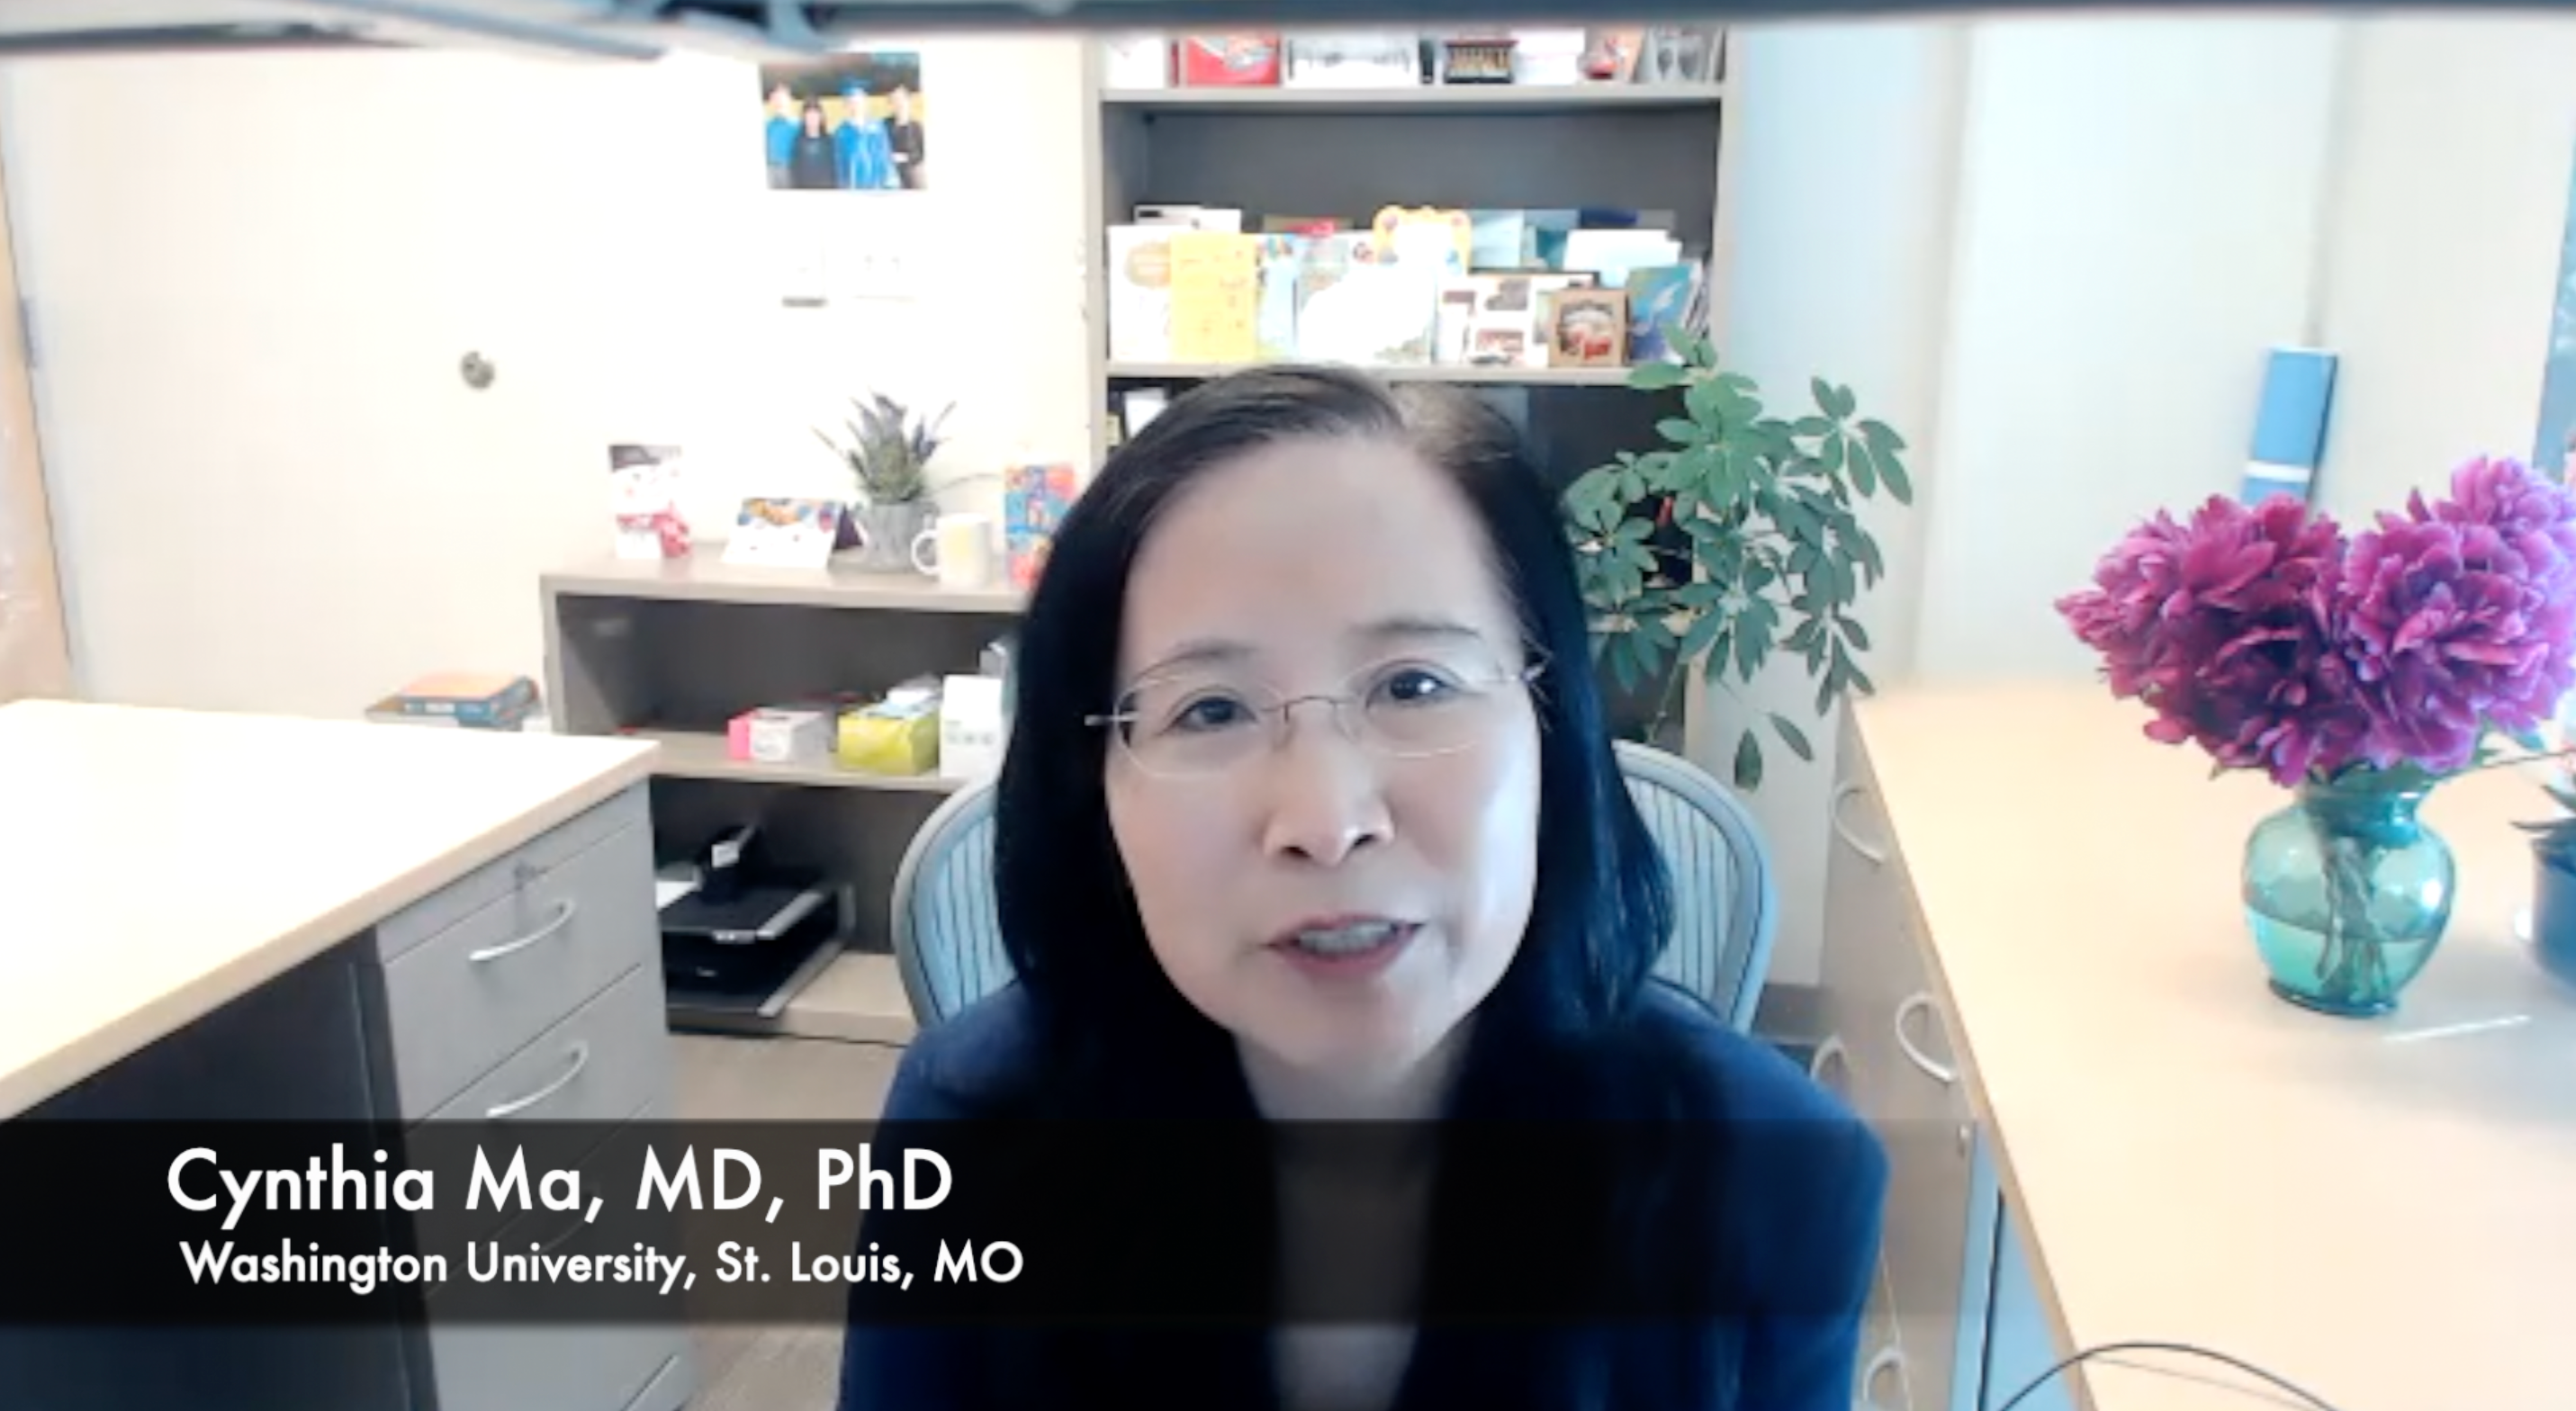 Cynthia Ma, MD, PhD, Discusses Results From a Phase 2 Trial of Neratinib/Fulvestrant in HER2-Mutant Breast Cancer